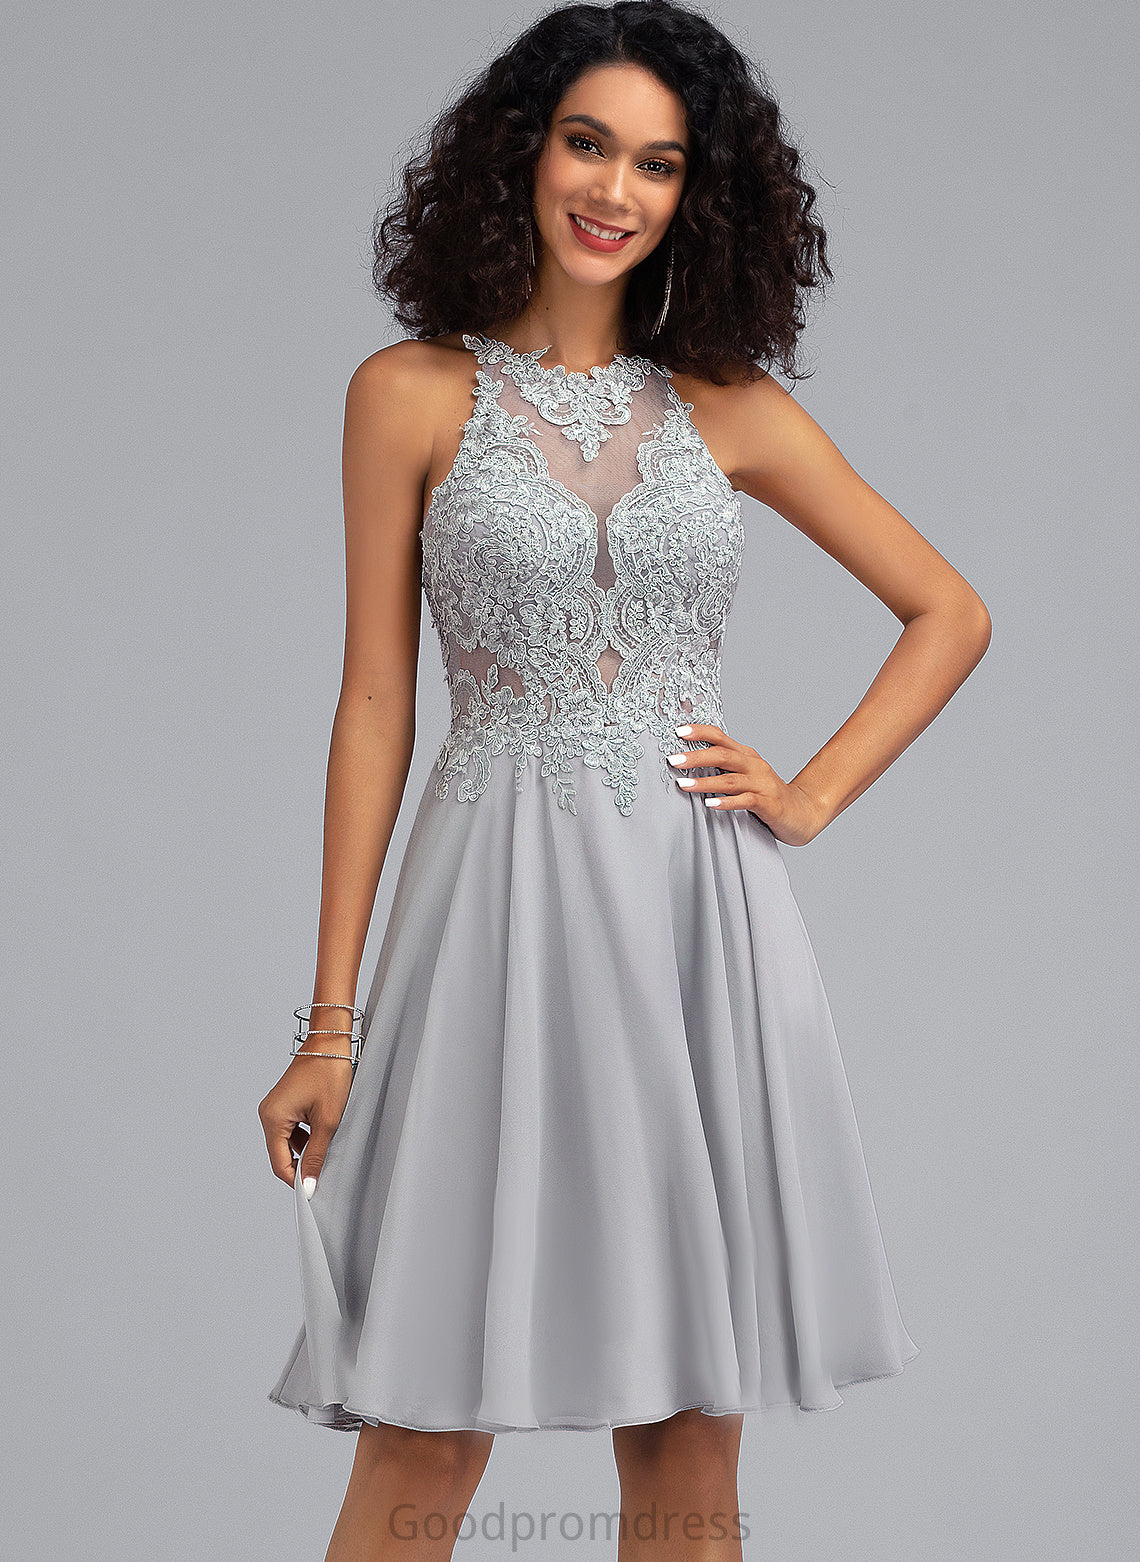 Chiffon Prom Dresses With Knee-Length Maci Neck Scoop Sequins A-Line